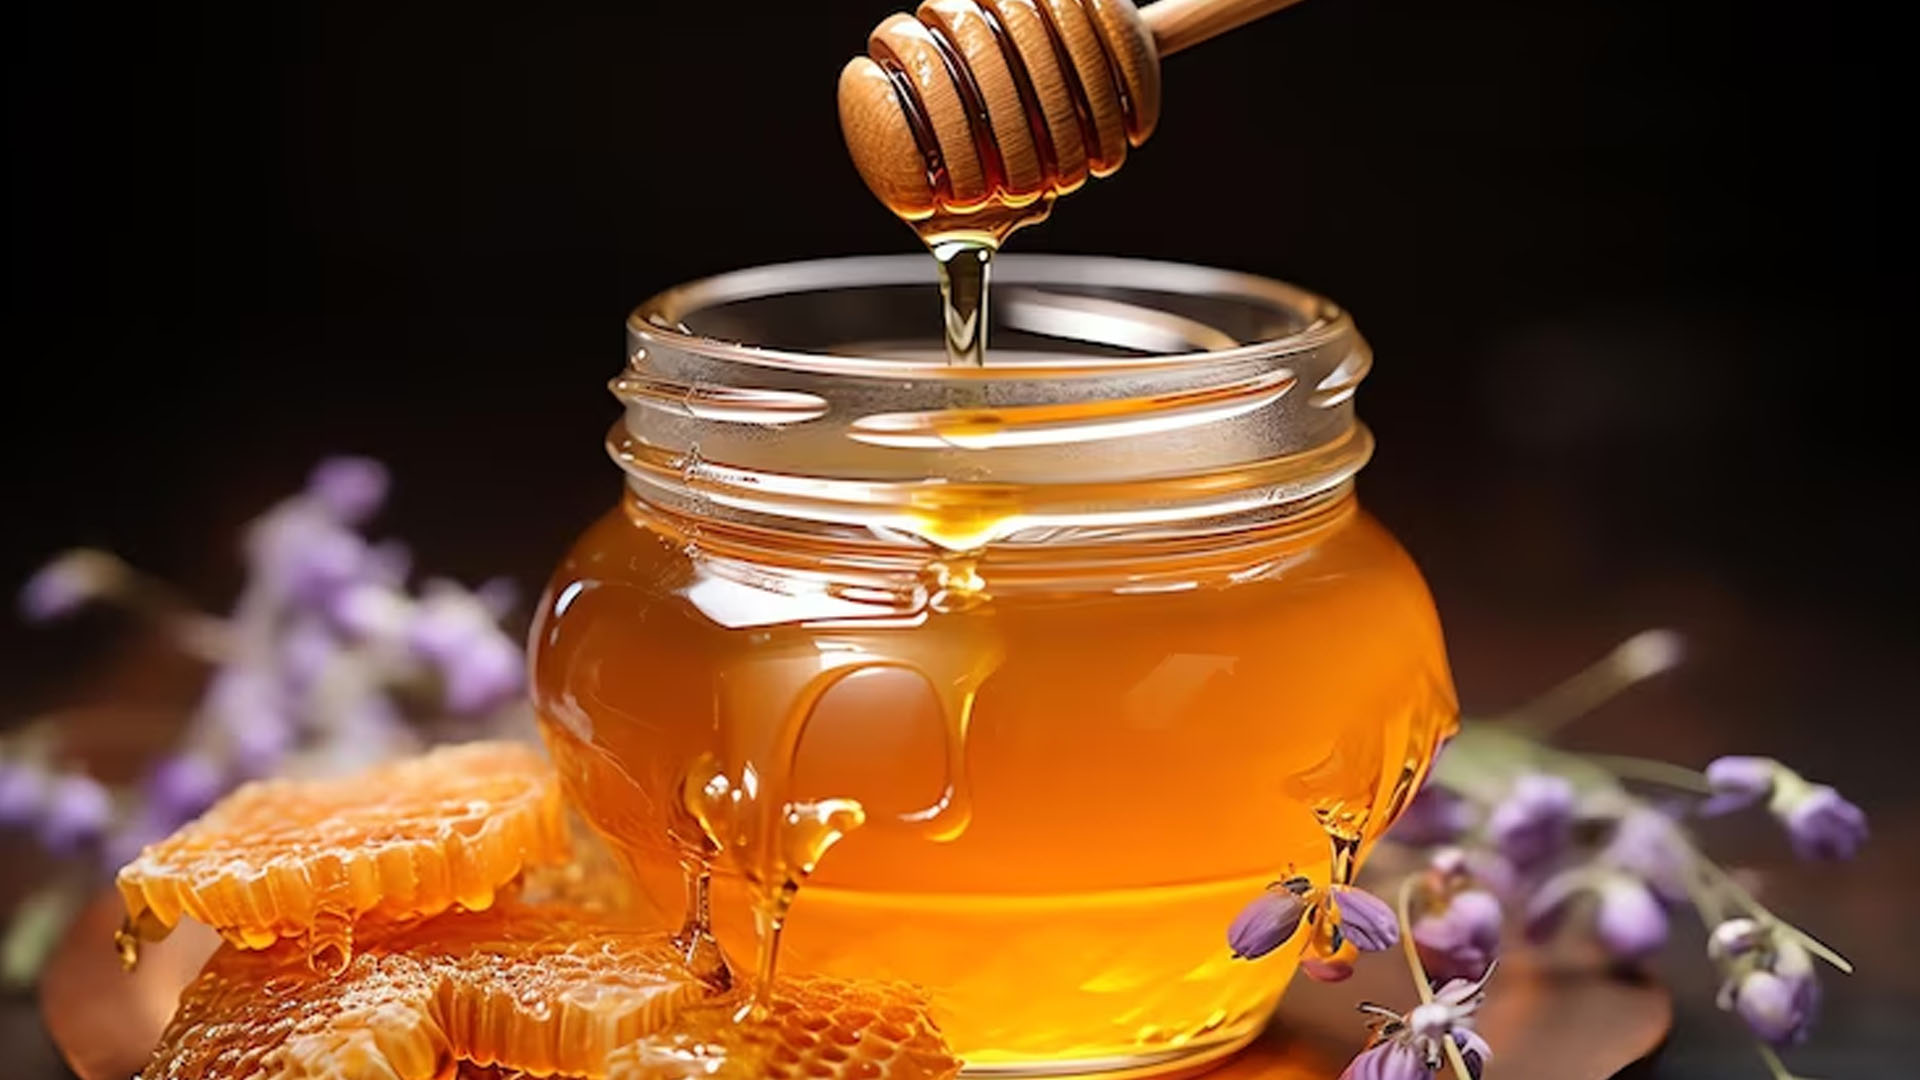 What are the Health Benefits of Honey?